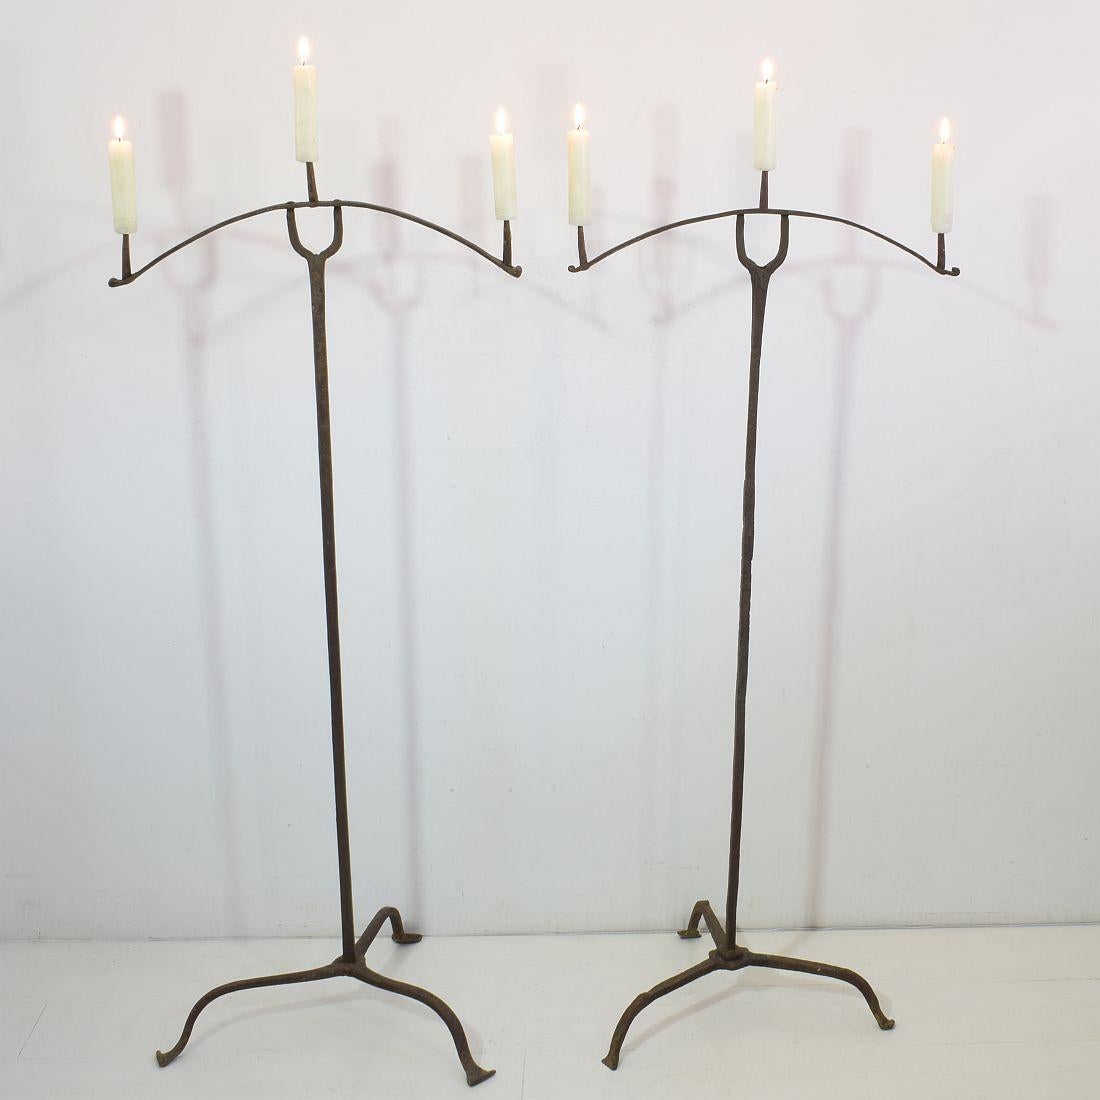 Beautiful pair of 17th century hand forged iron candleholders, France, circa 1650. Weathered with great patine
more photo's available on request.